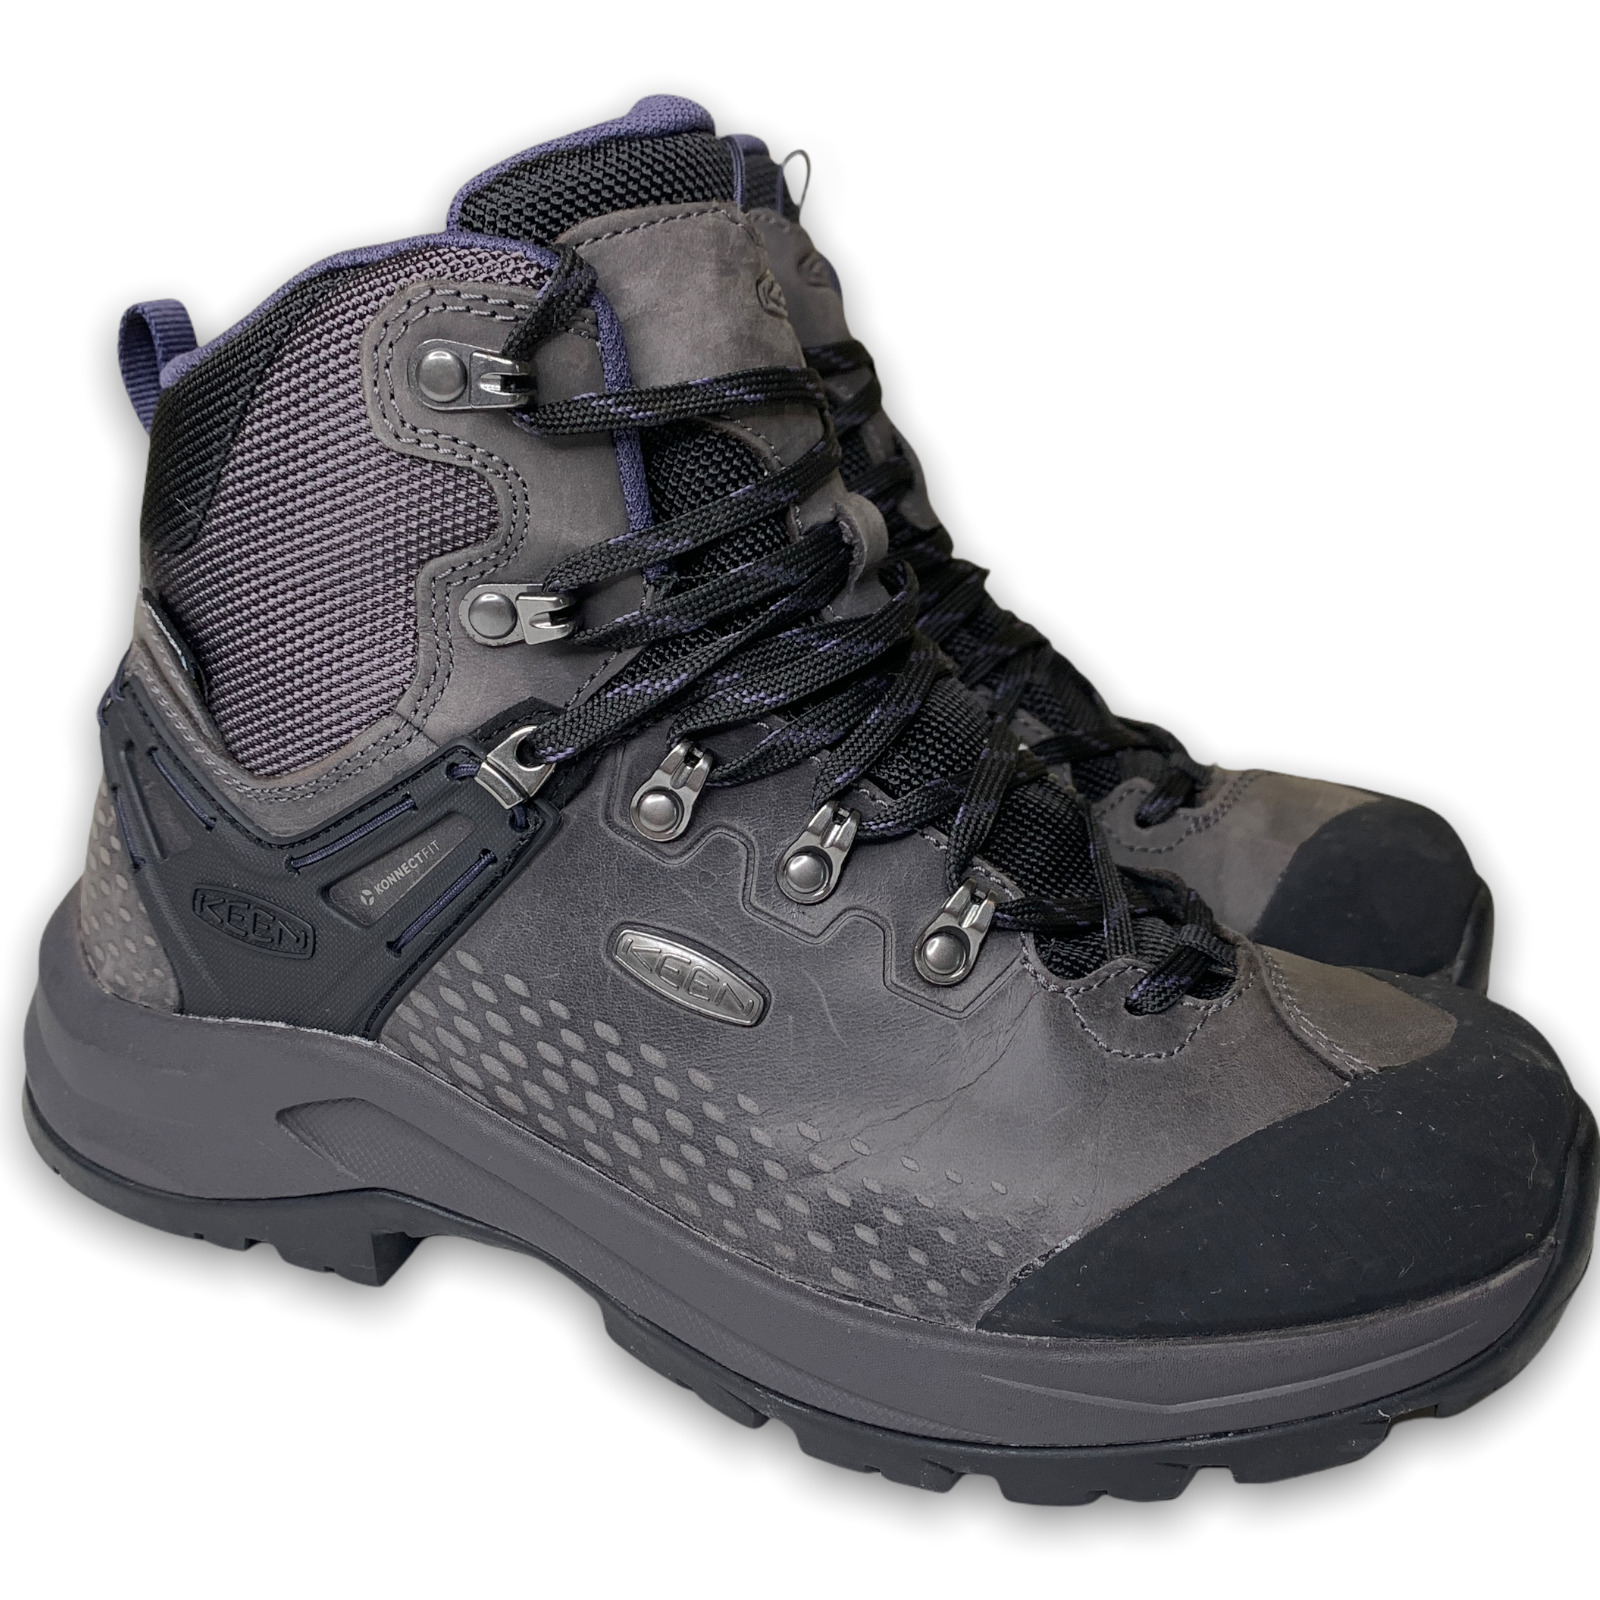 KEEN Womens Wild Sky Hiking Boots Size 7.5 Gray Black Leather Mid Top Waterproof